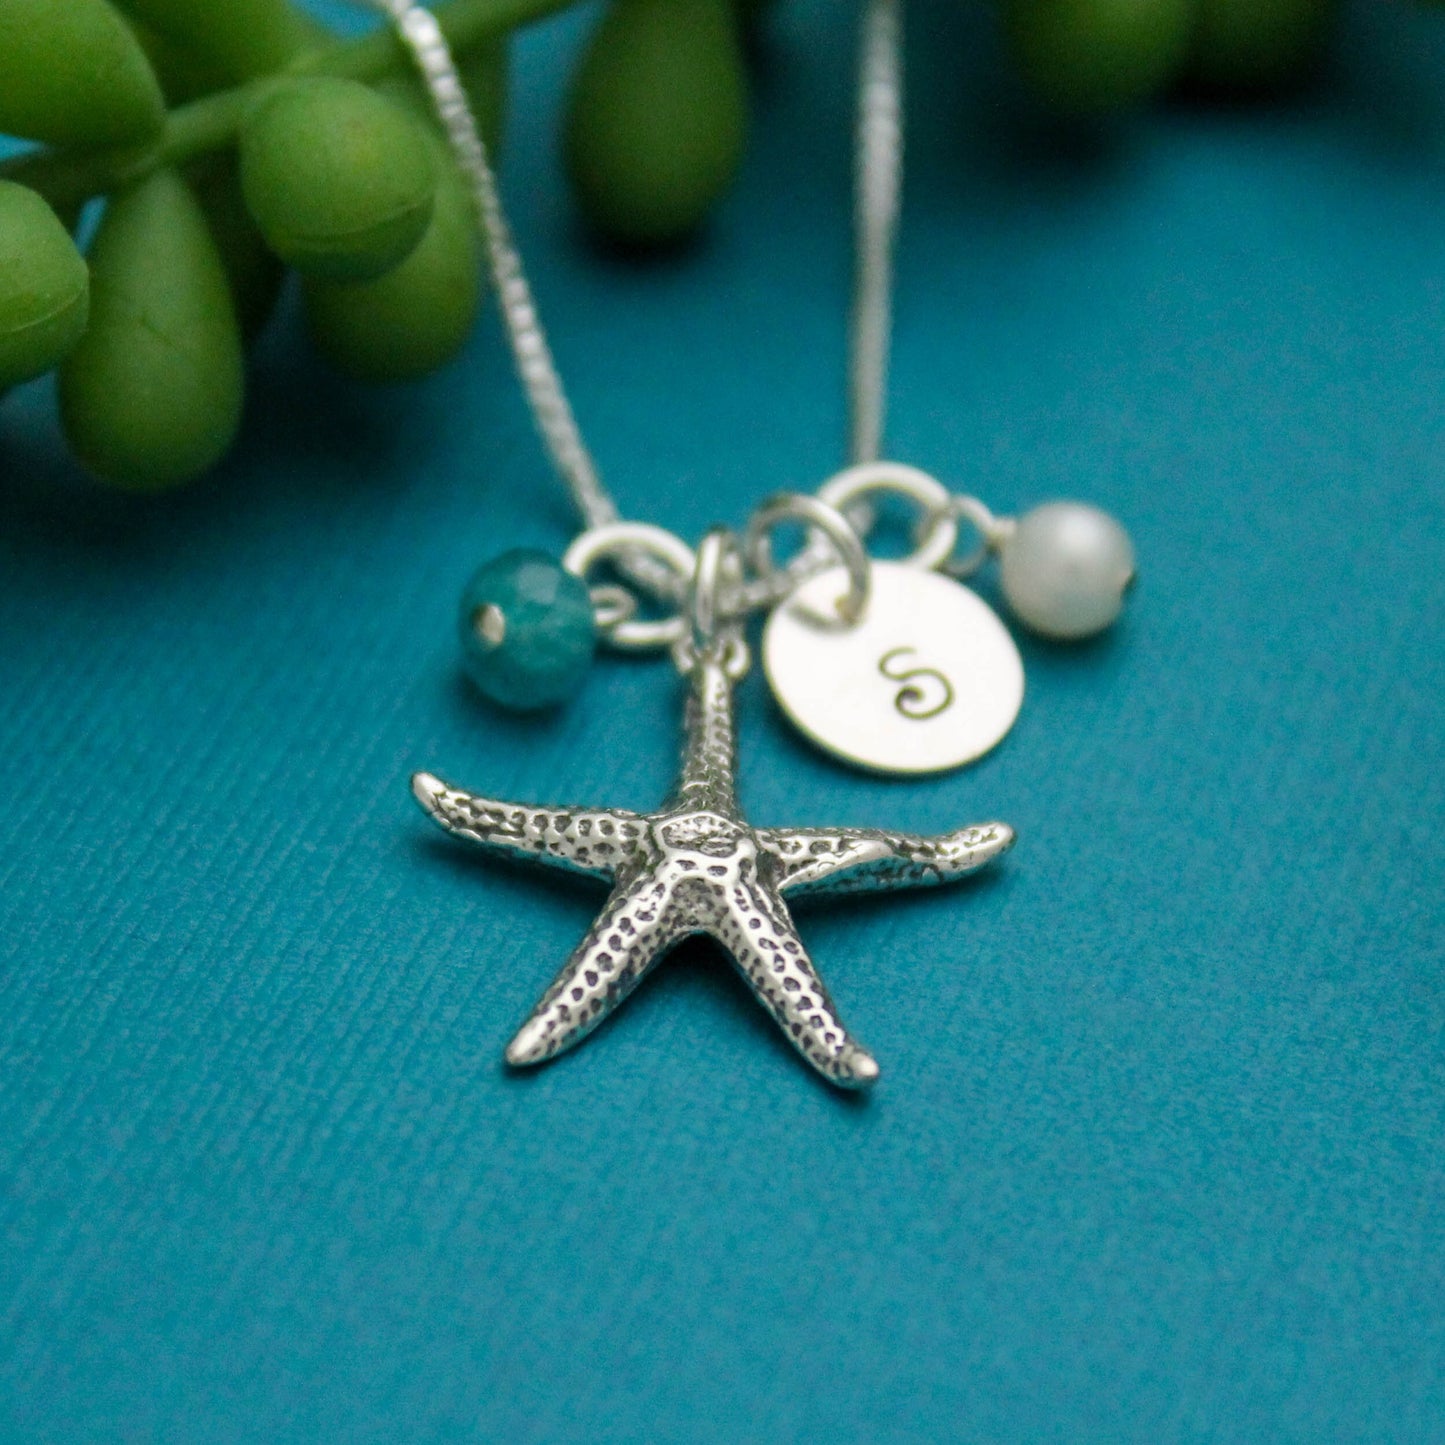 Sterling Silver Personalized Starfish Necklace with Initial and Birthstone, Pearl, Shell or Sea Glass Charms Hand Stamped Jewelry